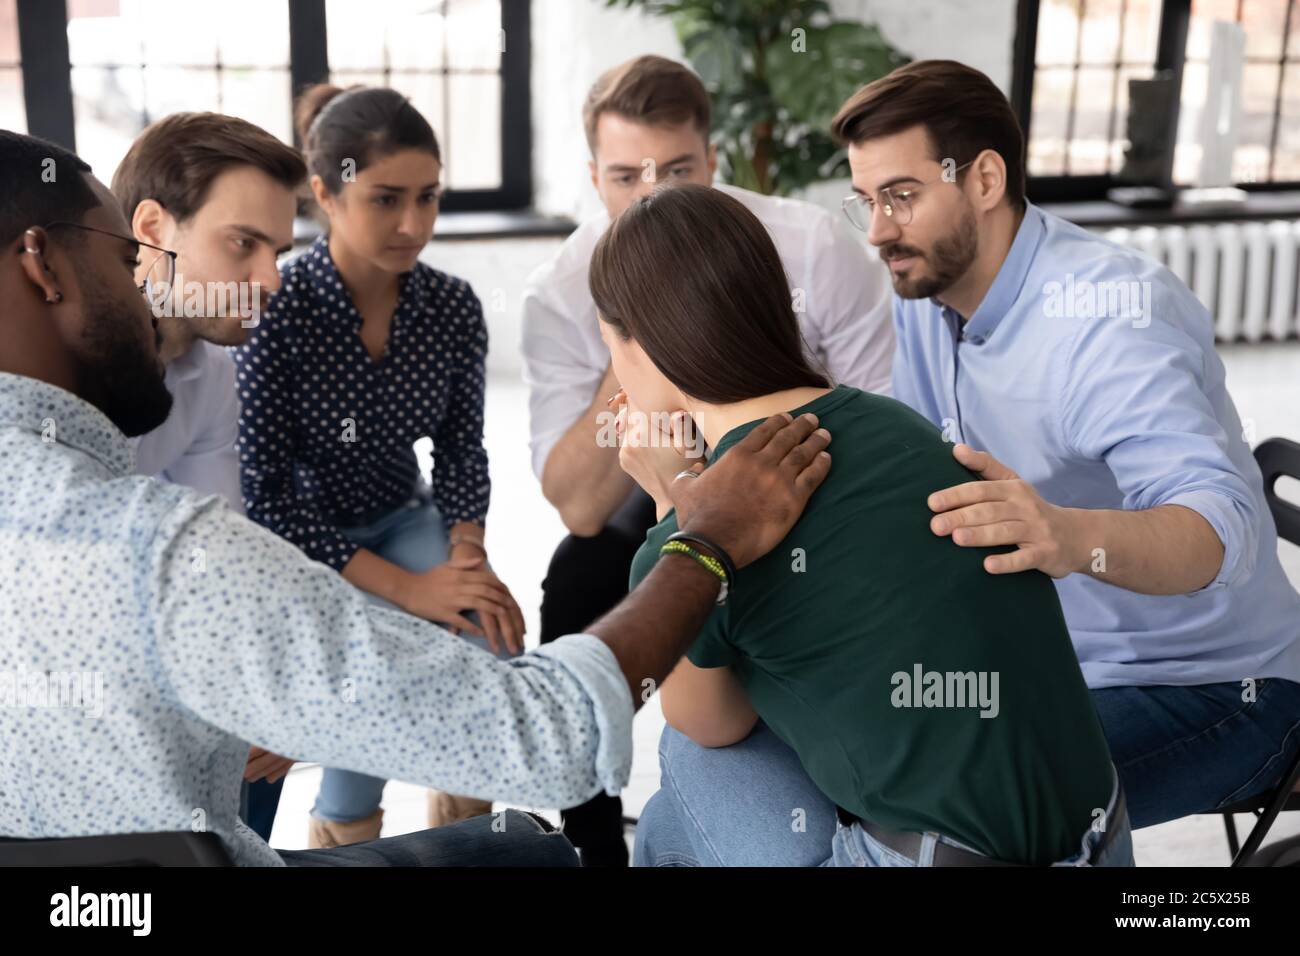 Members supporting caucasian female rehab session participant Stock Photo